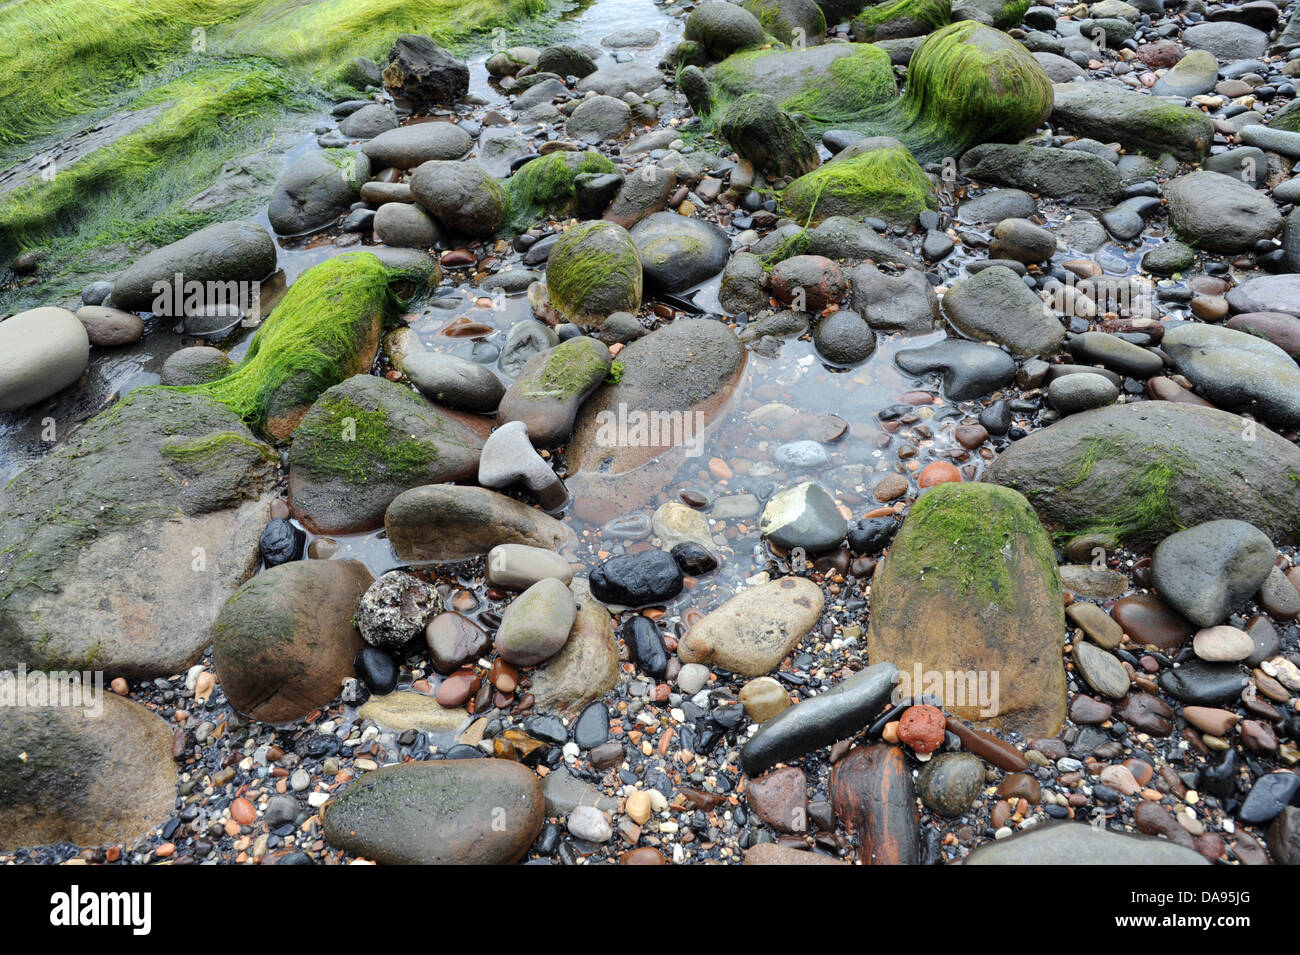 Small rock pool on a pebbly beach surrounded by green seaweed. Stock Photo